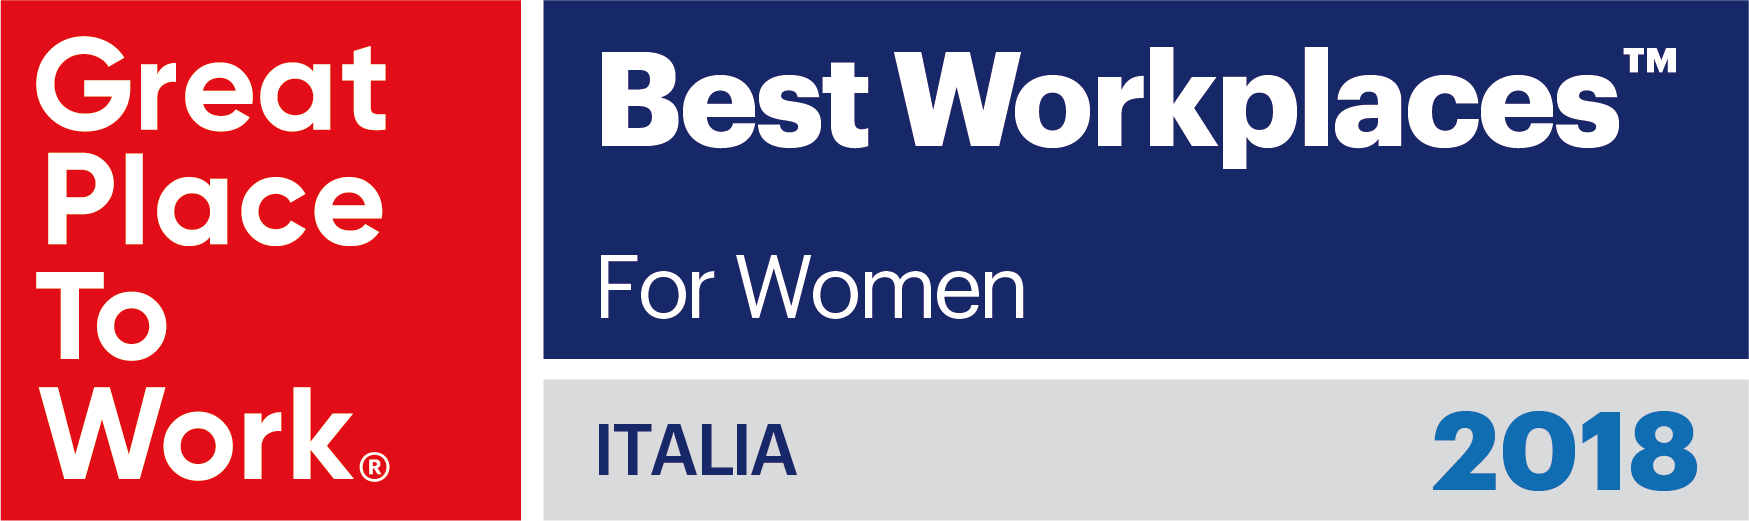 Best Workplaces for Women 2018